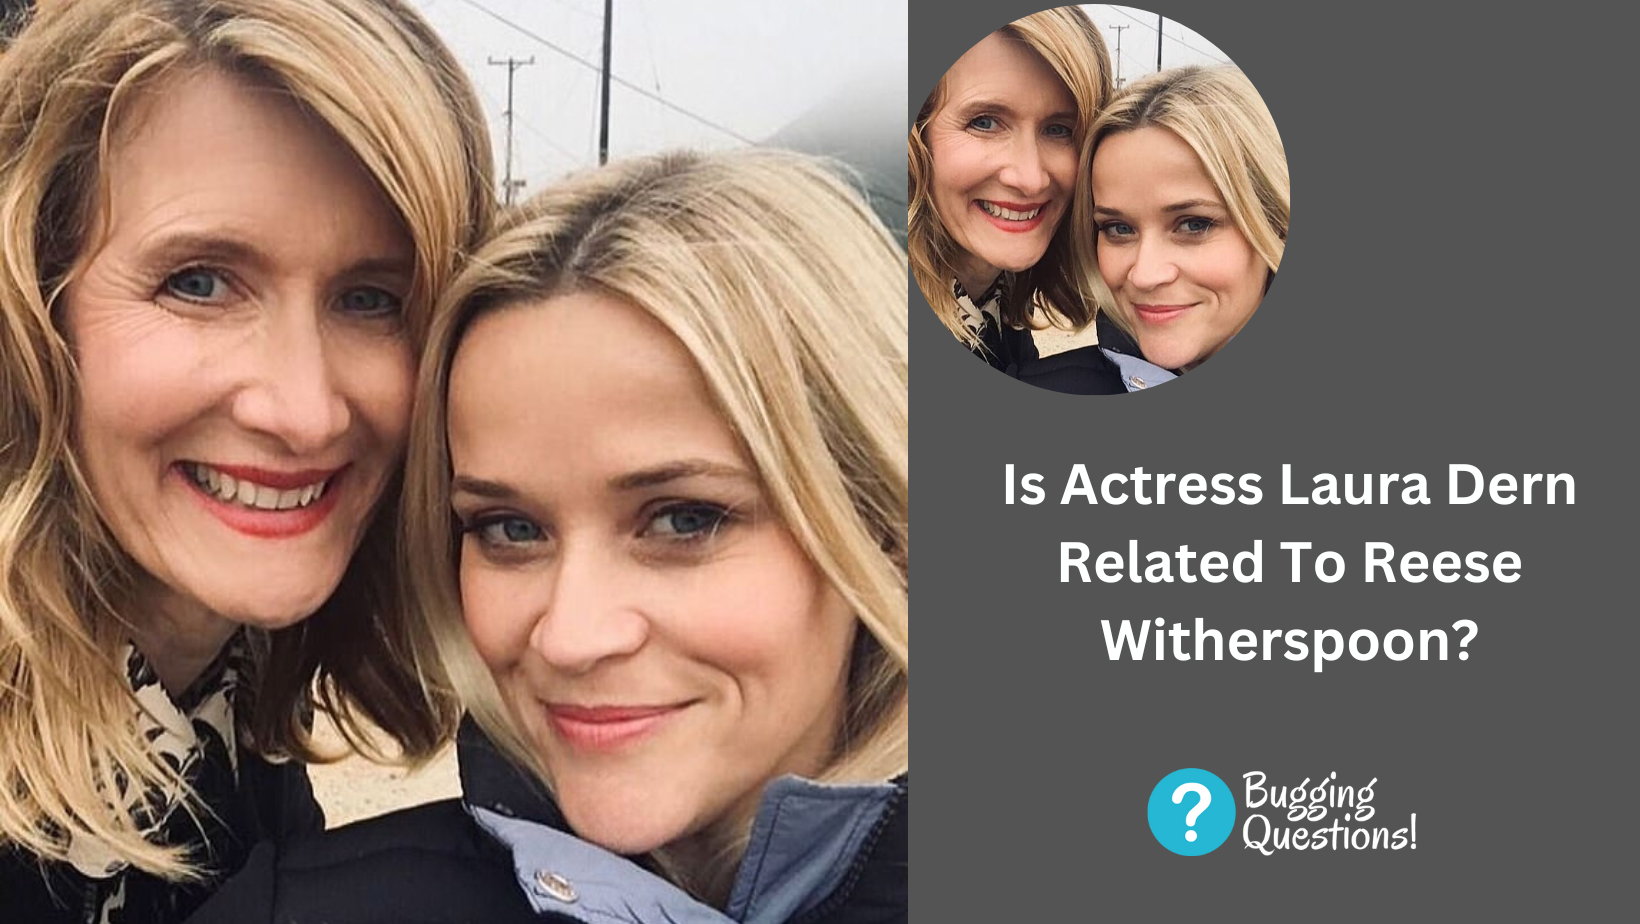 Is Actress Laura Dern Related To Reese Witherspoon?